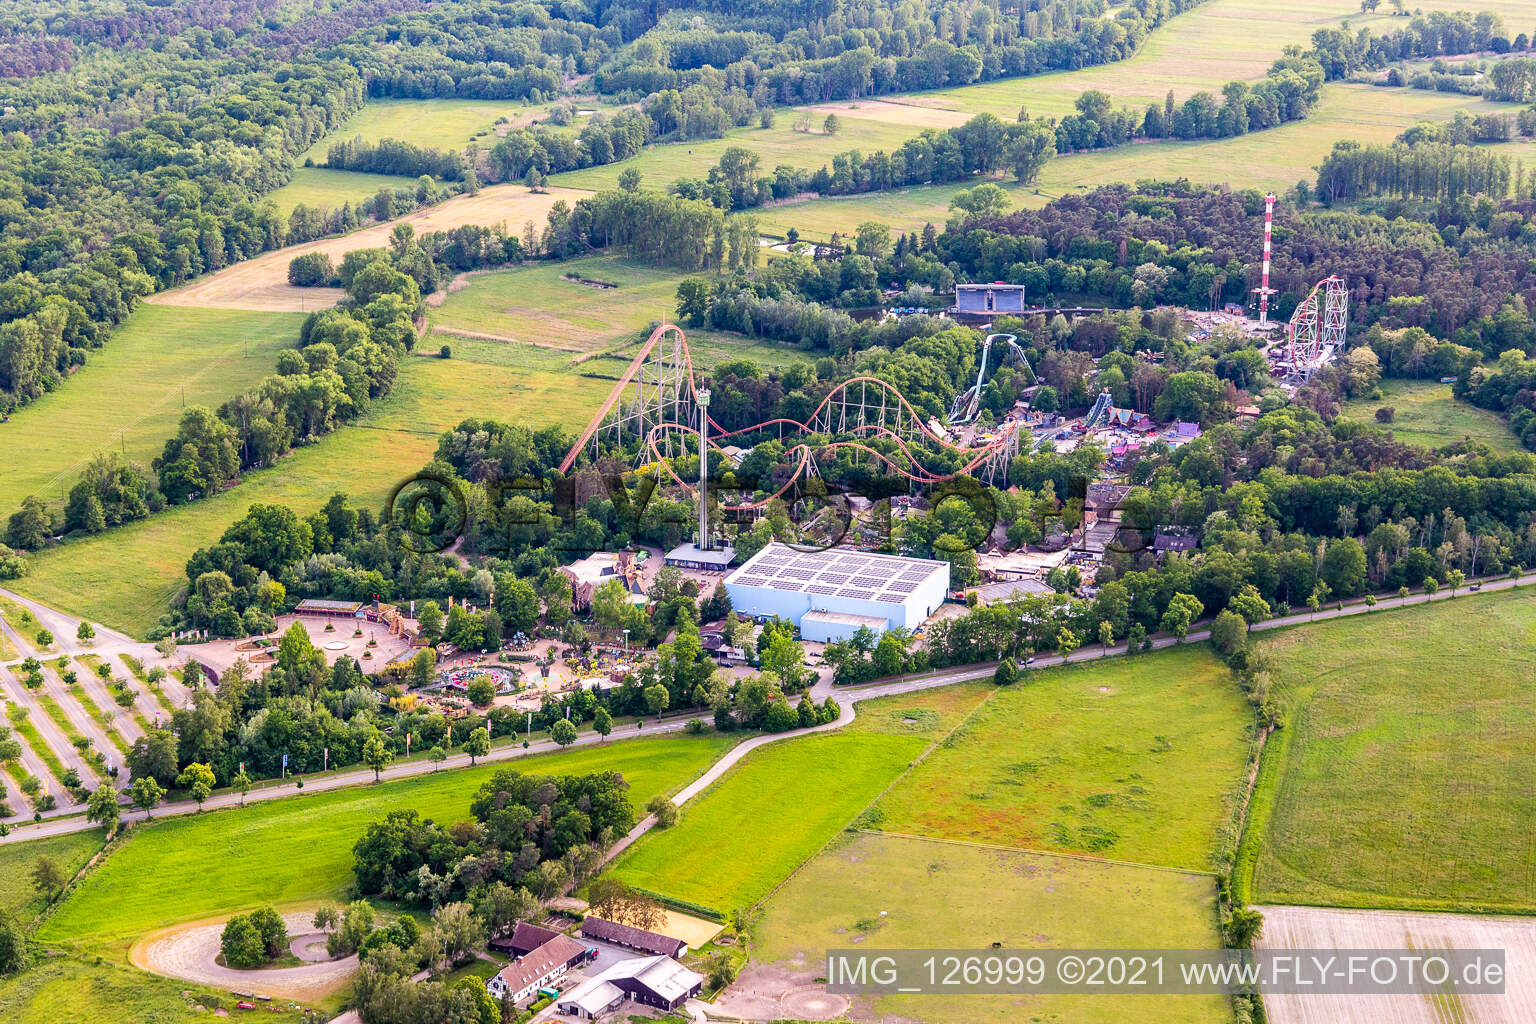 Drone image of Holiday Park in Haßloch in the state Rhineland-Palatinate, Germany